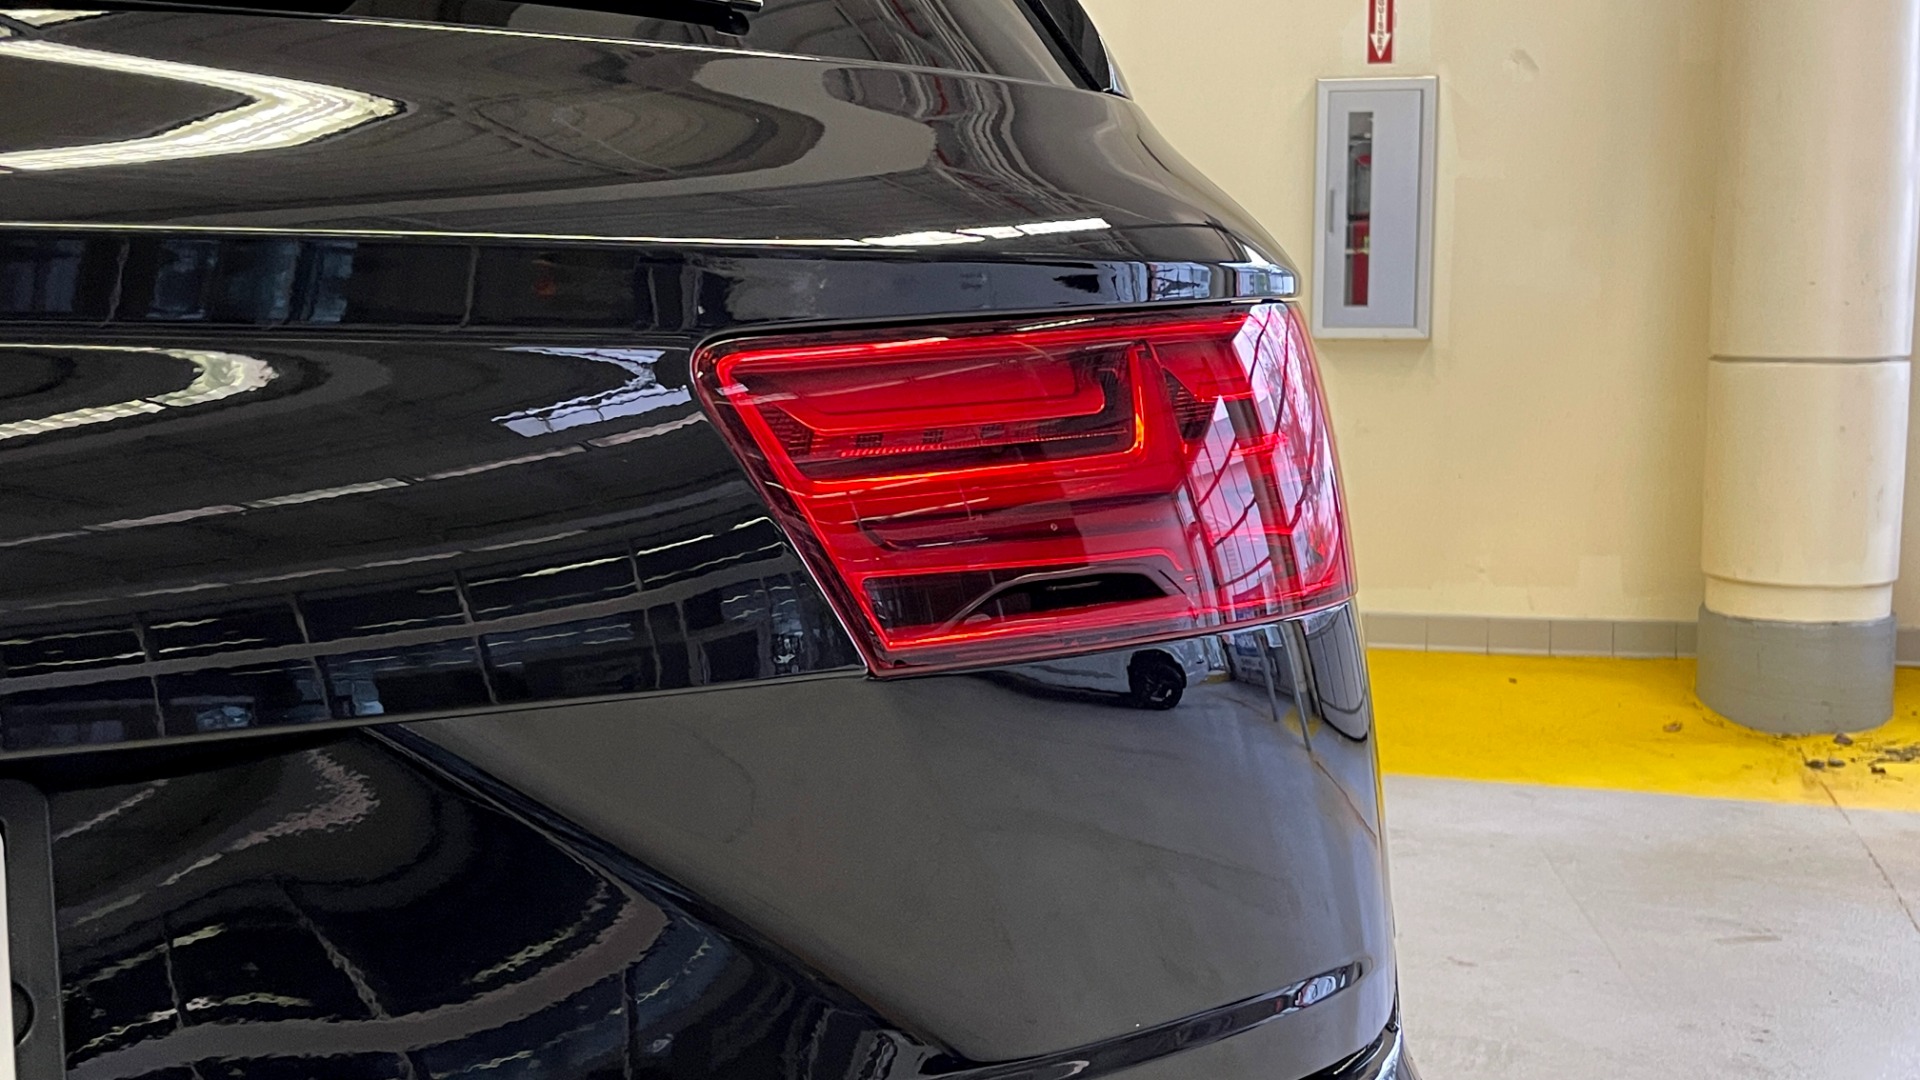 Used 2019 Audi Q7 PREMIUM PLUS / NAV / SUNROOF / DRVR ASST / COLD WTHR / 20IN WHLS / REARVIEW for sale Sold at Formula Imports in Charlotte NC 28227 15